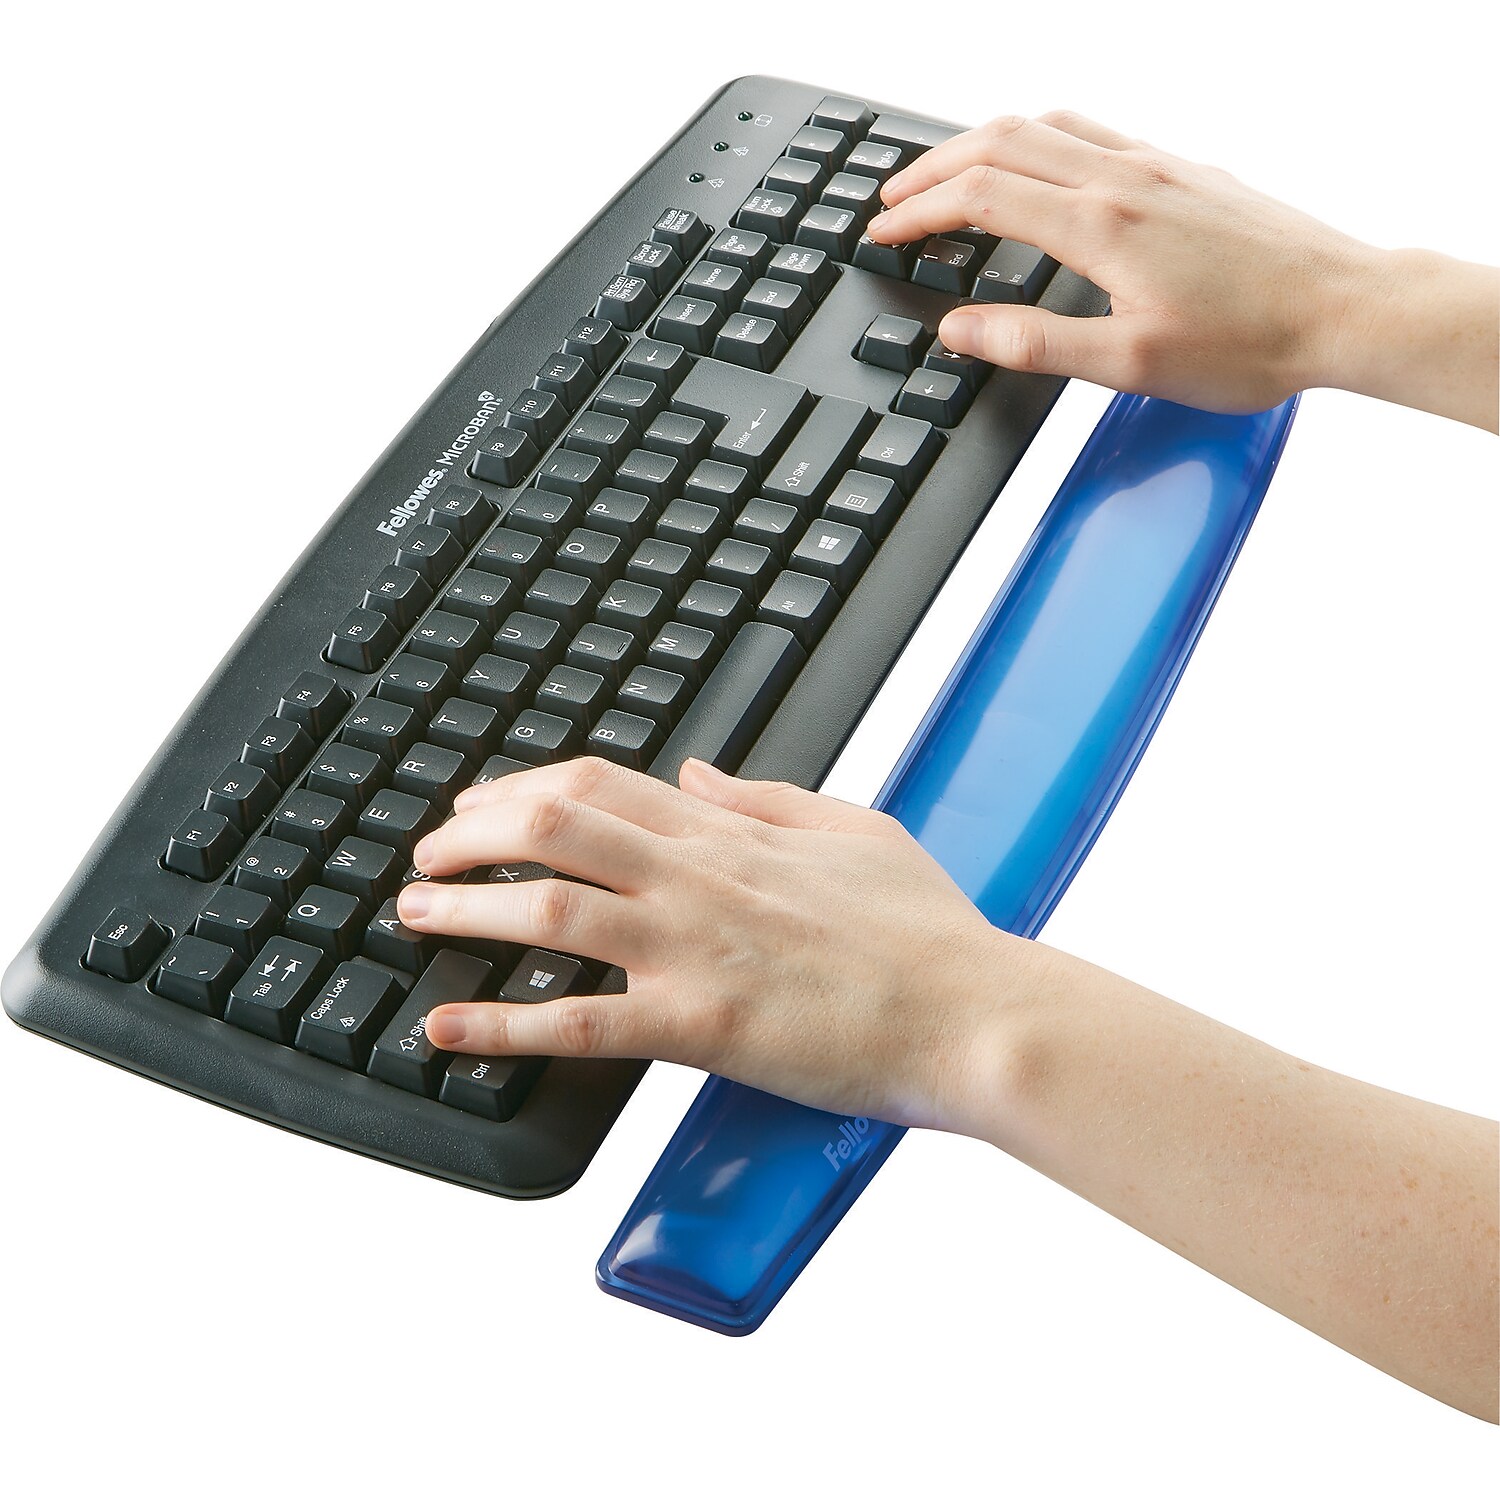 Fellowes 91137 Gel Wrist Rest - Crystals, Blue - image 3 of 4